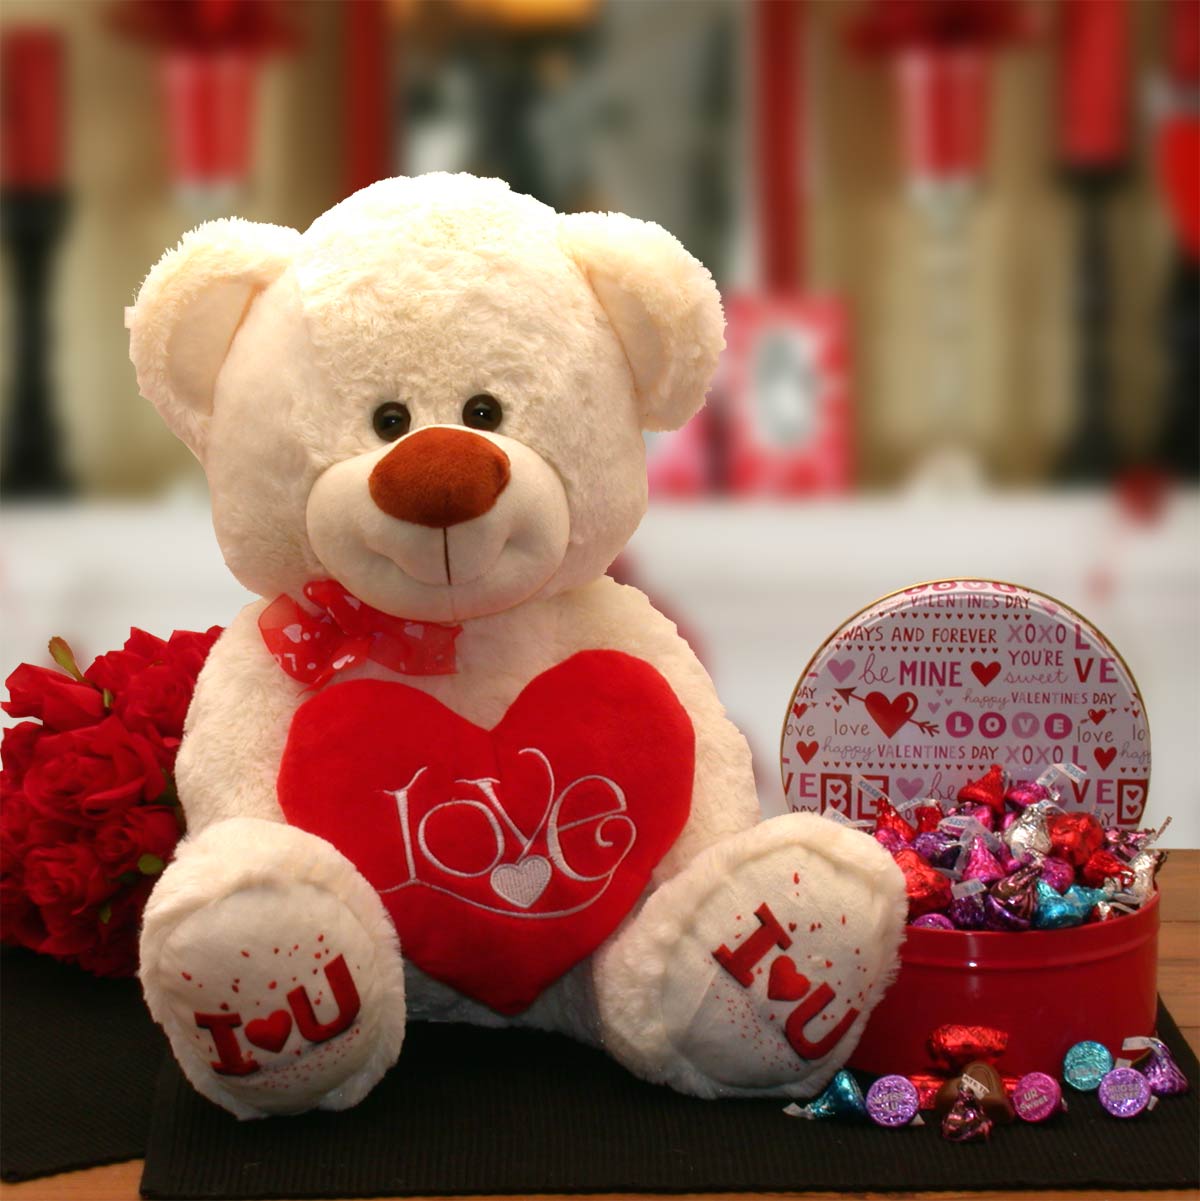 Love & Kisses Valentine Teddy Bear Gift Set, Gift Baskets Drop Shipping - A Blissfully Beautiful Boutique